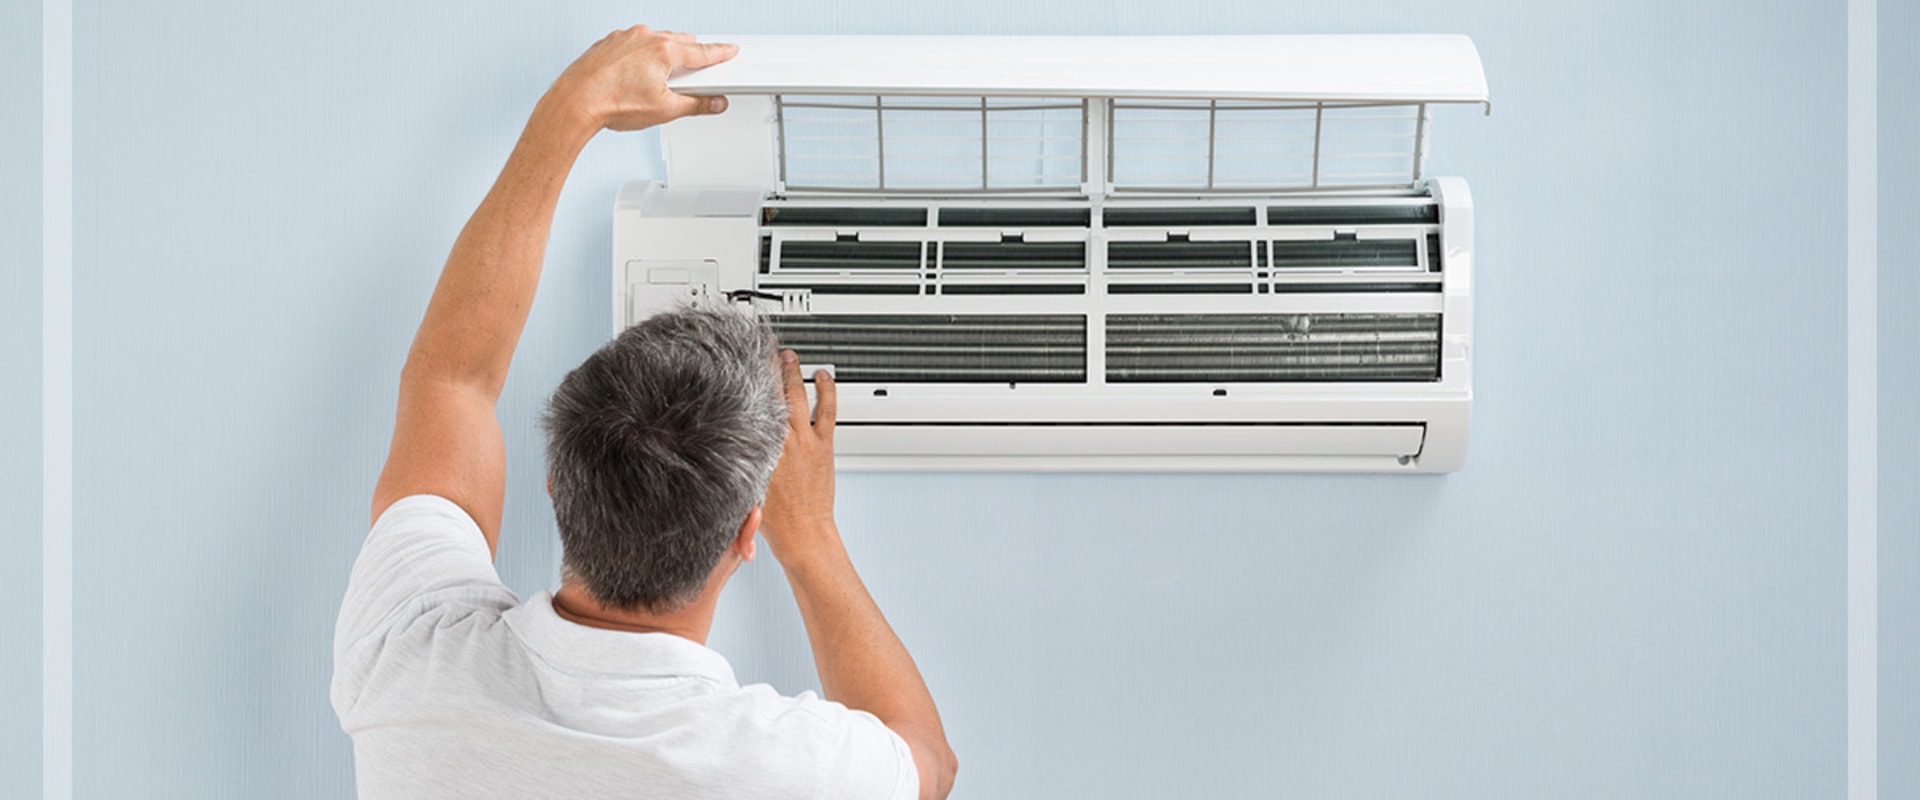 What is the Average Cost of an Air Conditioning Unit in My Area?